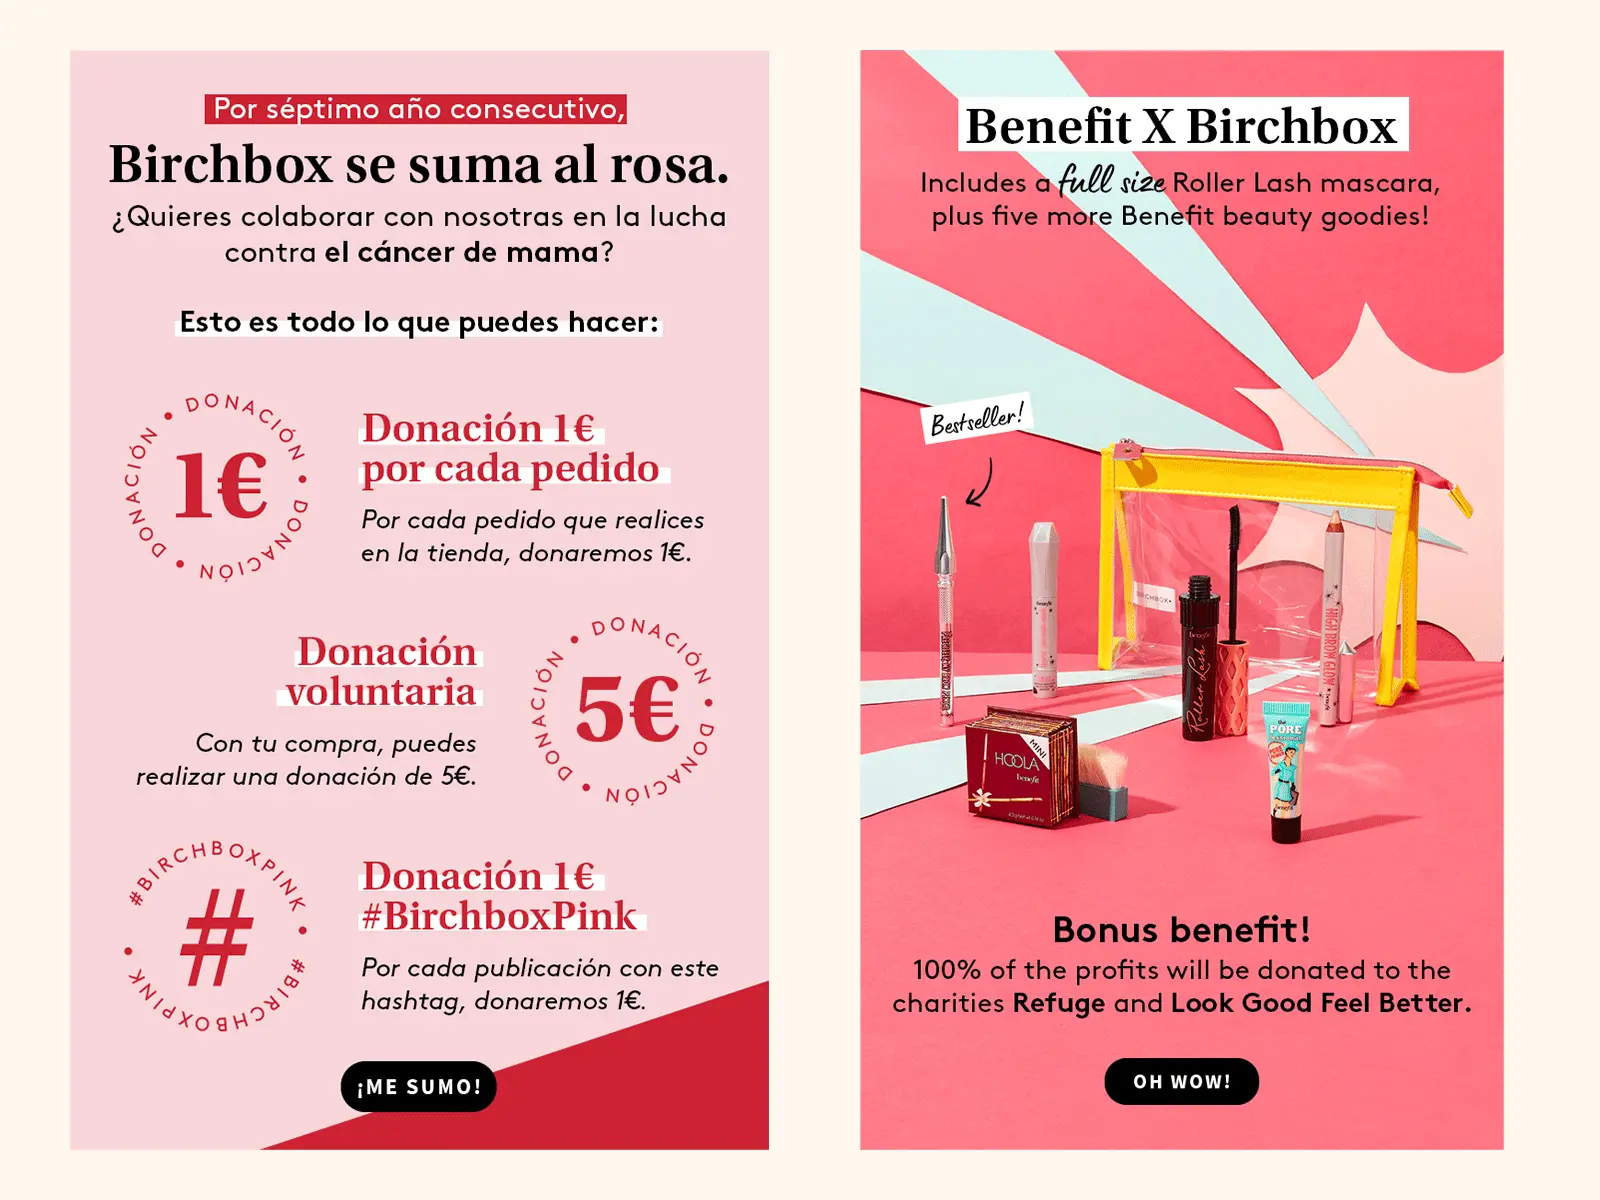 Email Newsletter design, on left Breast Cancer Awareness campaign and on right collaboration Birchbox X Benefit